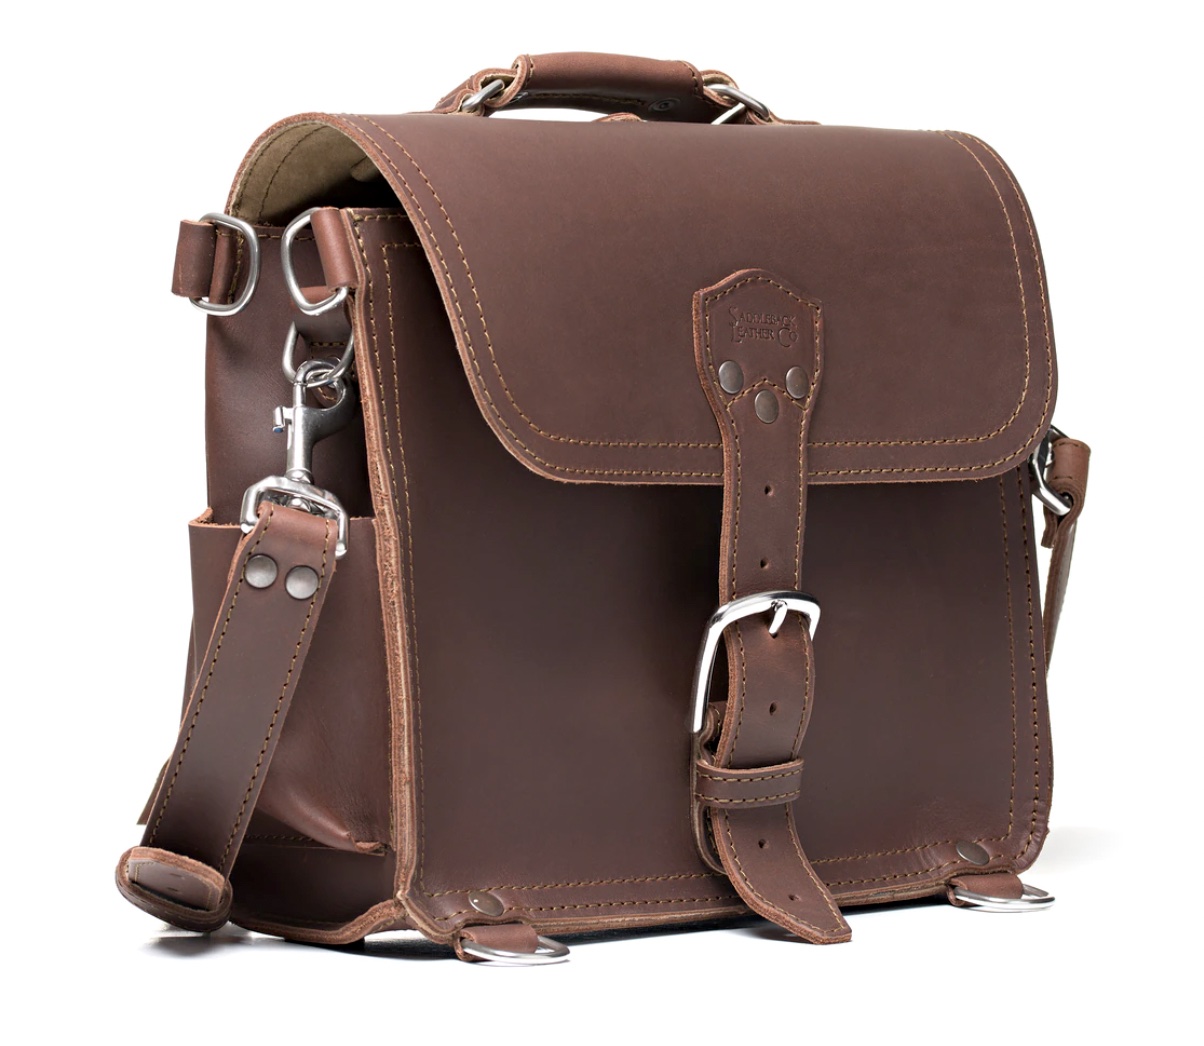 Saddleback Leather brings back a classic design... with upgrades! - The ...